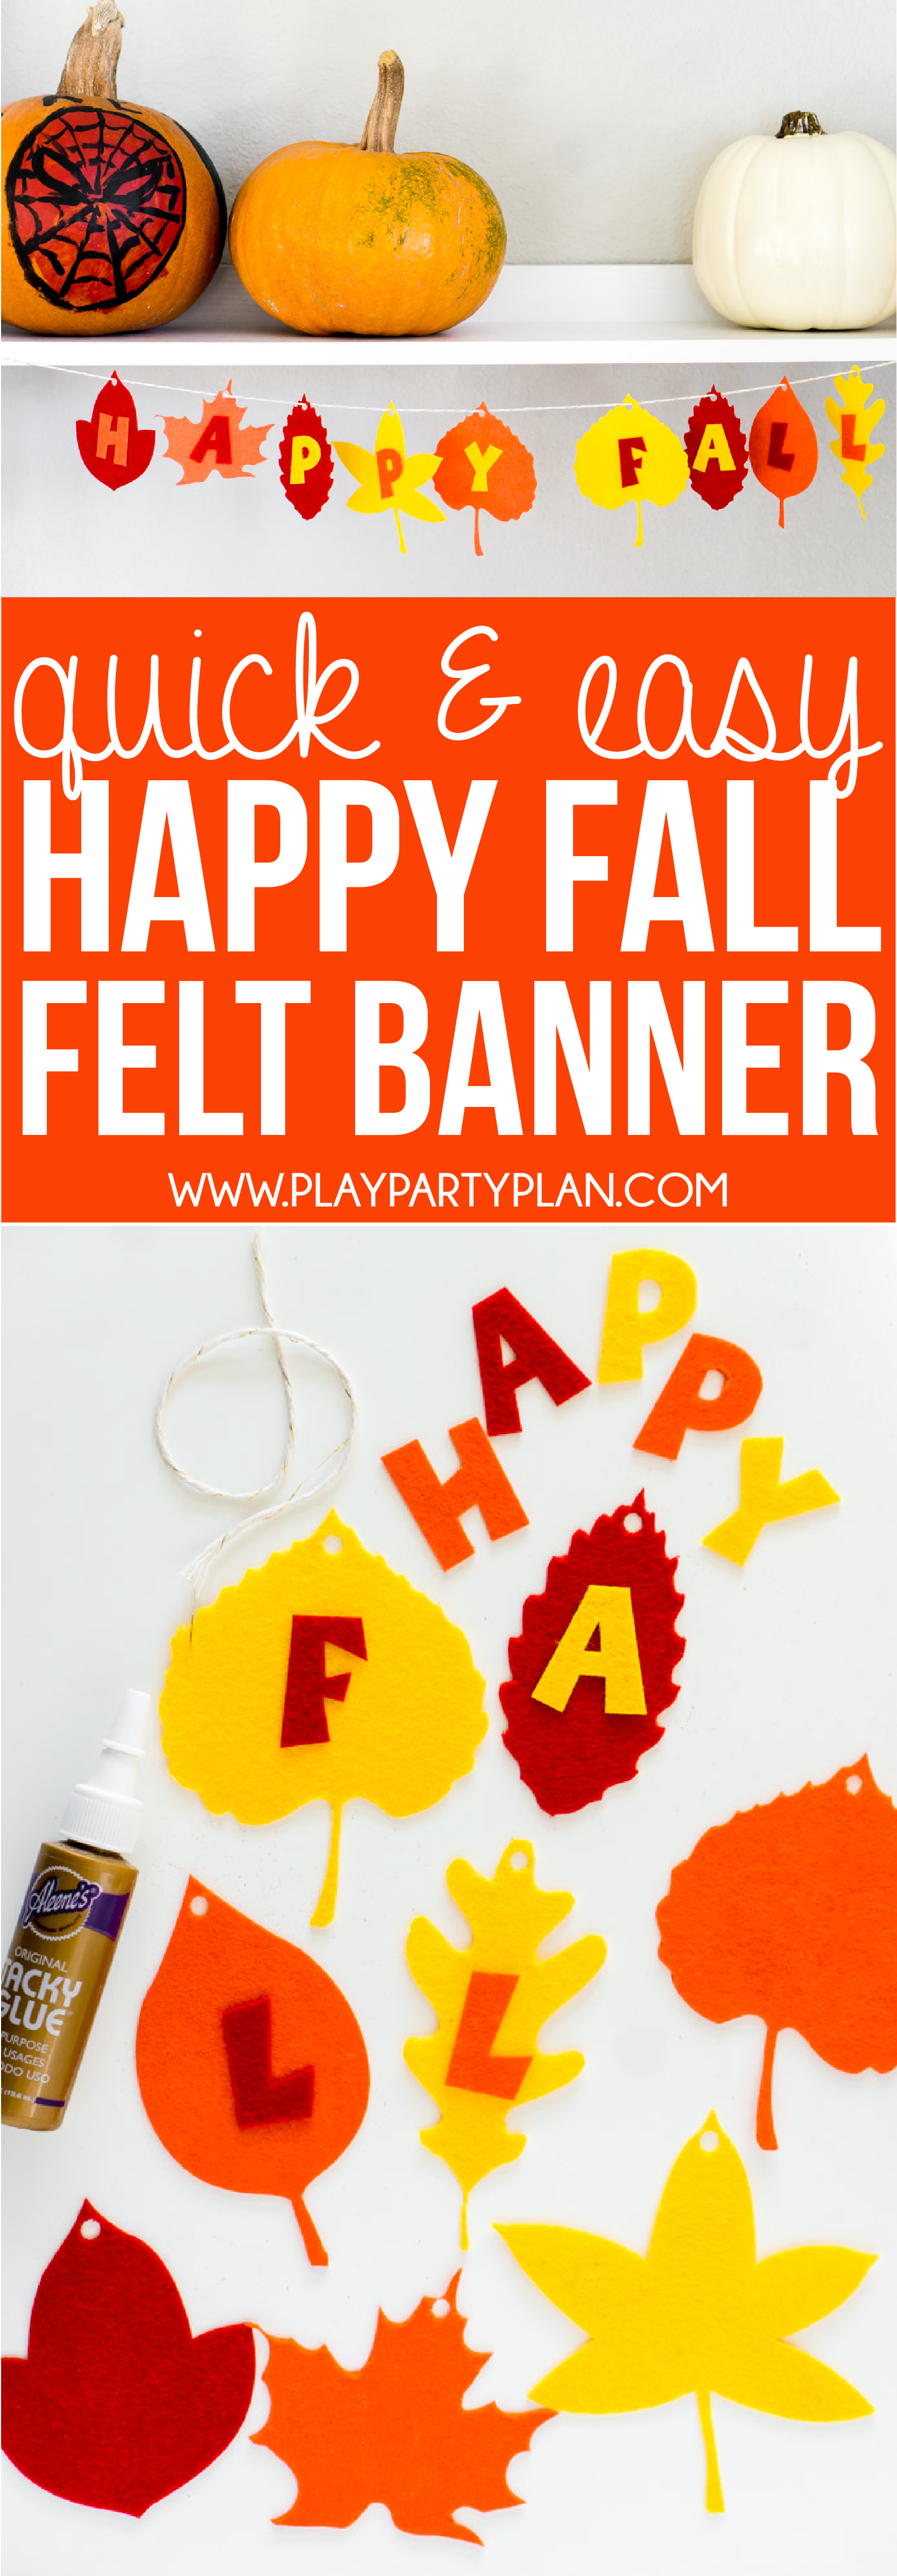 This happy fall banner can be made quickly with a Cricut Maker and the free template included! It’s one of the easiest DIY fall banner ideas ever!